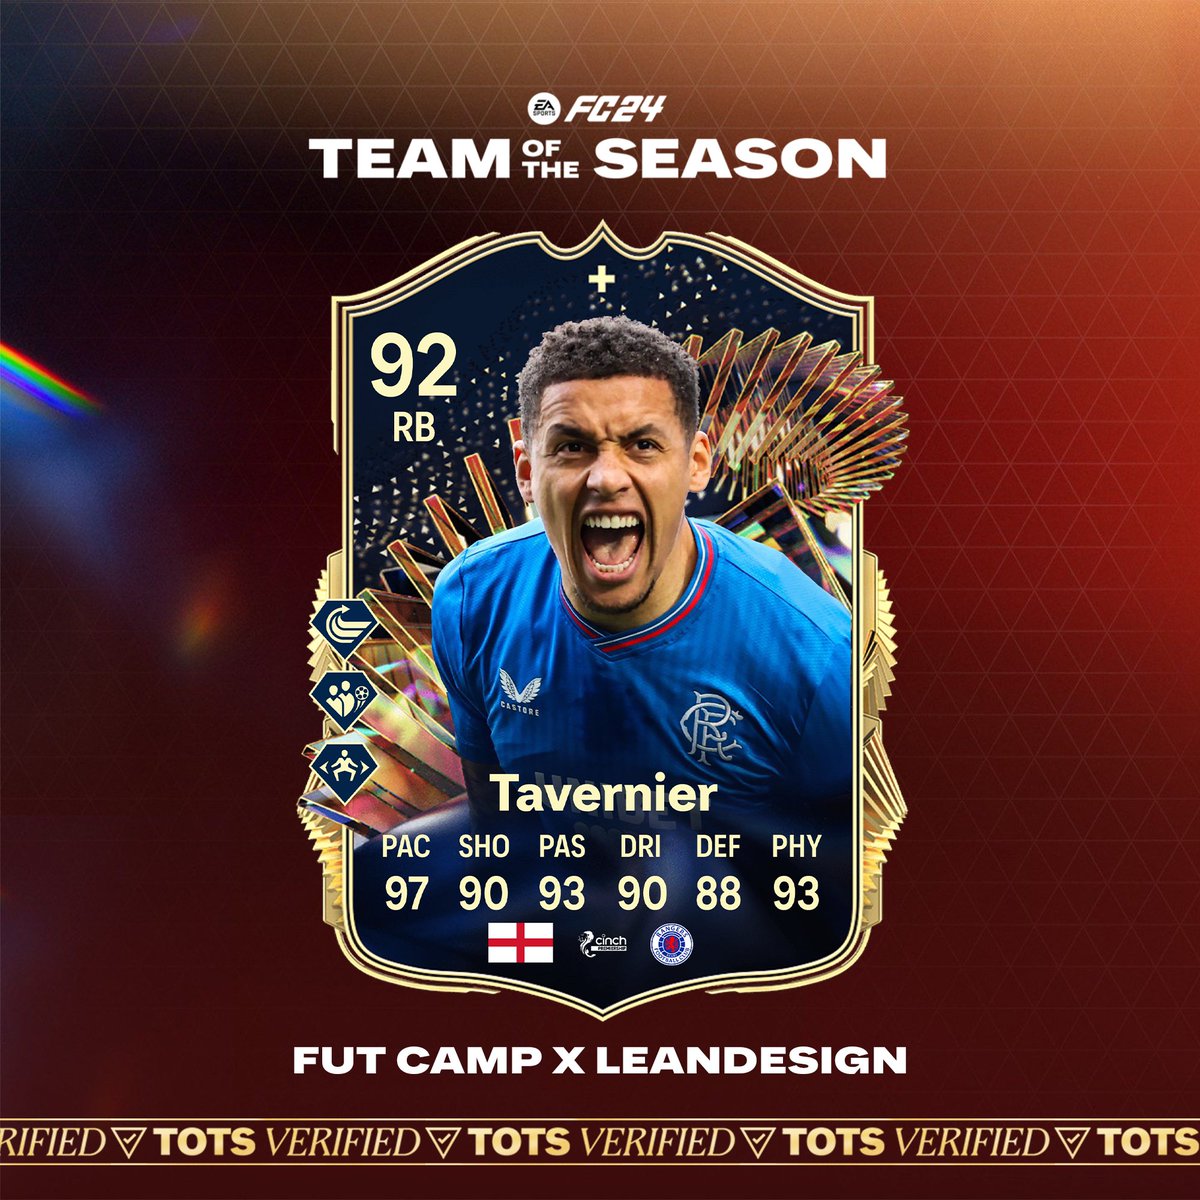 Things you love to see 🌍 TAVERNIER TOTS OFFICIAL CARD 😍🔥 Stats ✅ PS+ ✅ Dynamic ✅ FIFA legend 👏🏼 @LeanDesign_ 🤝